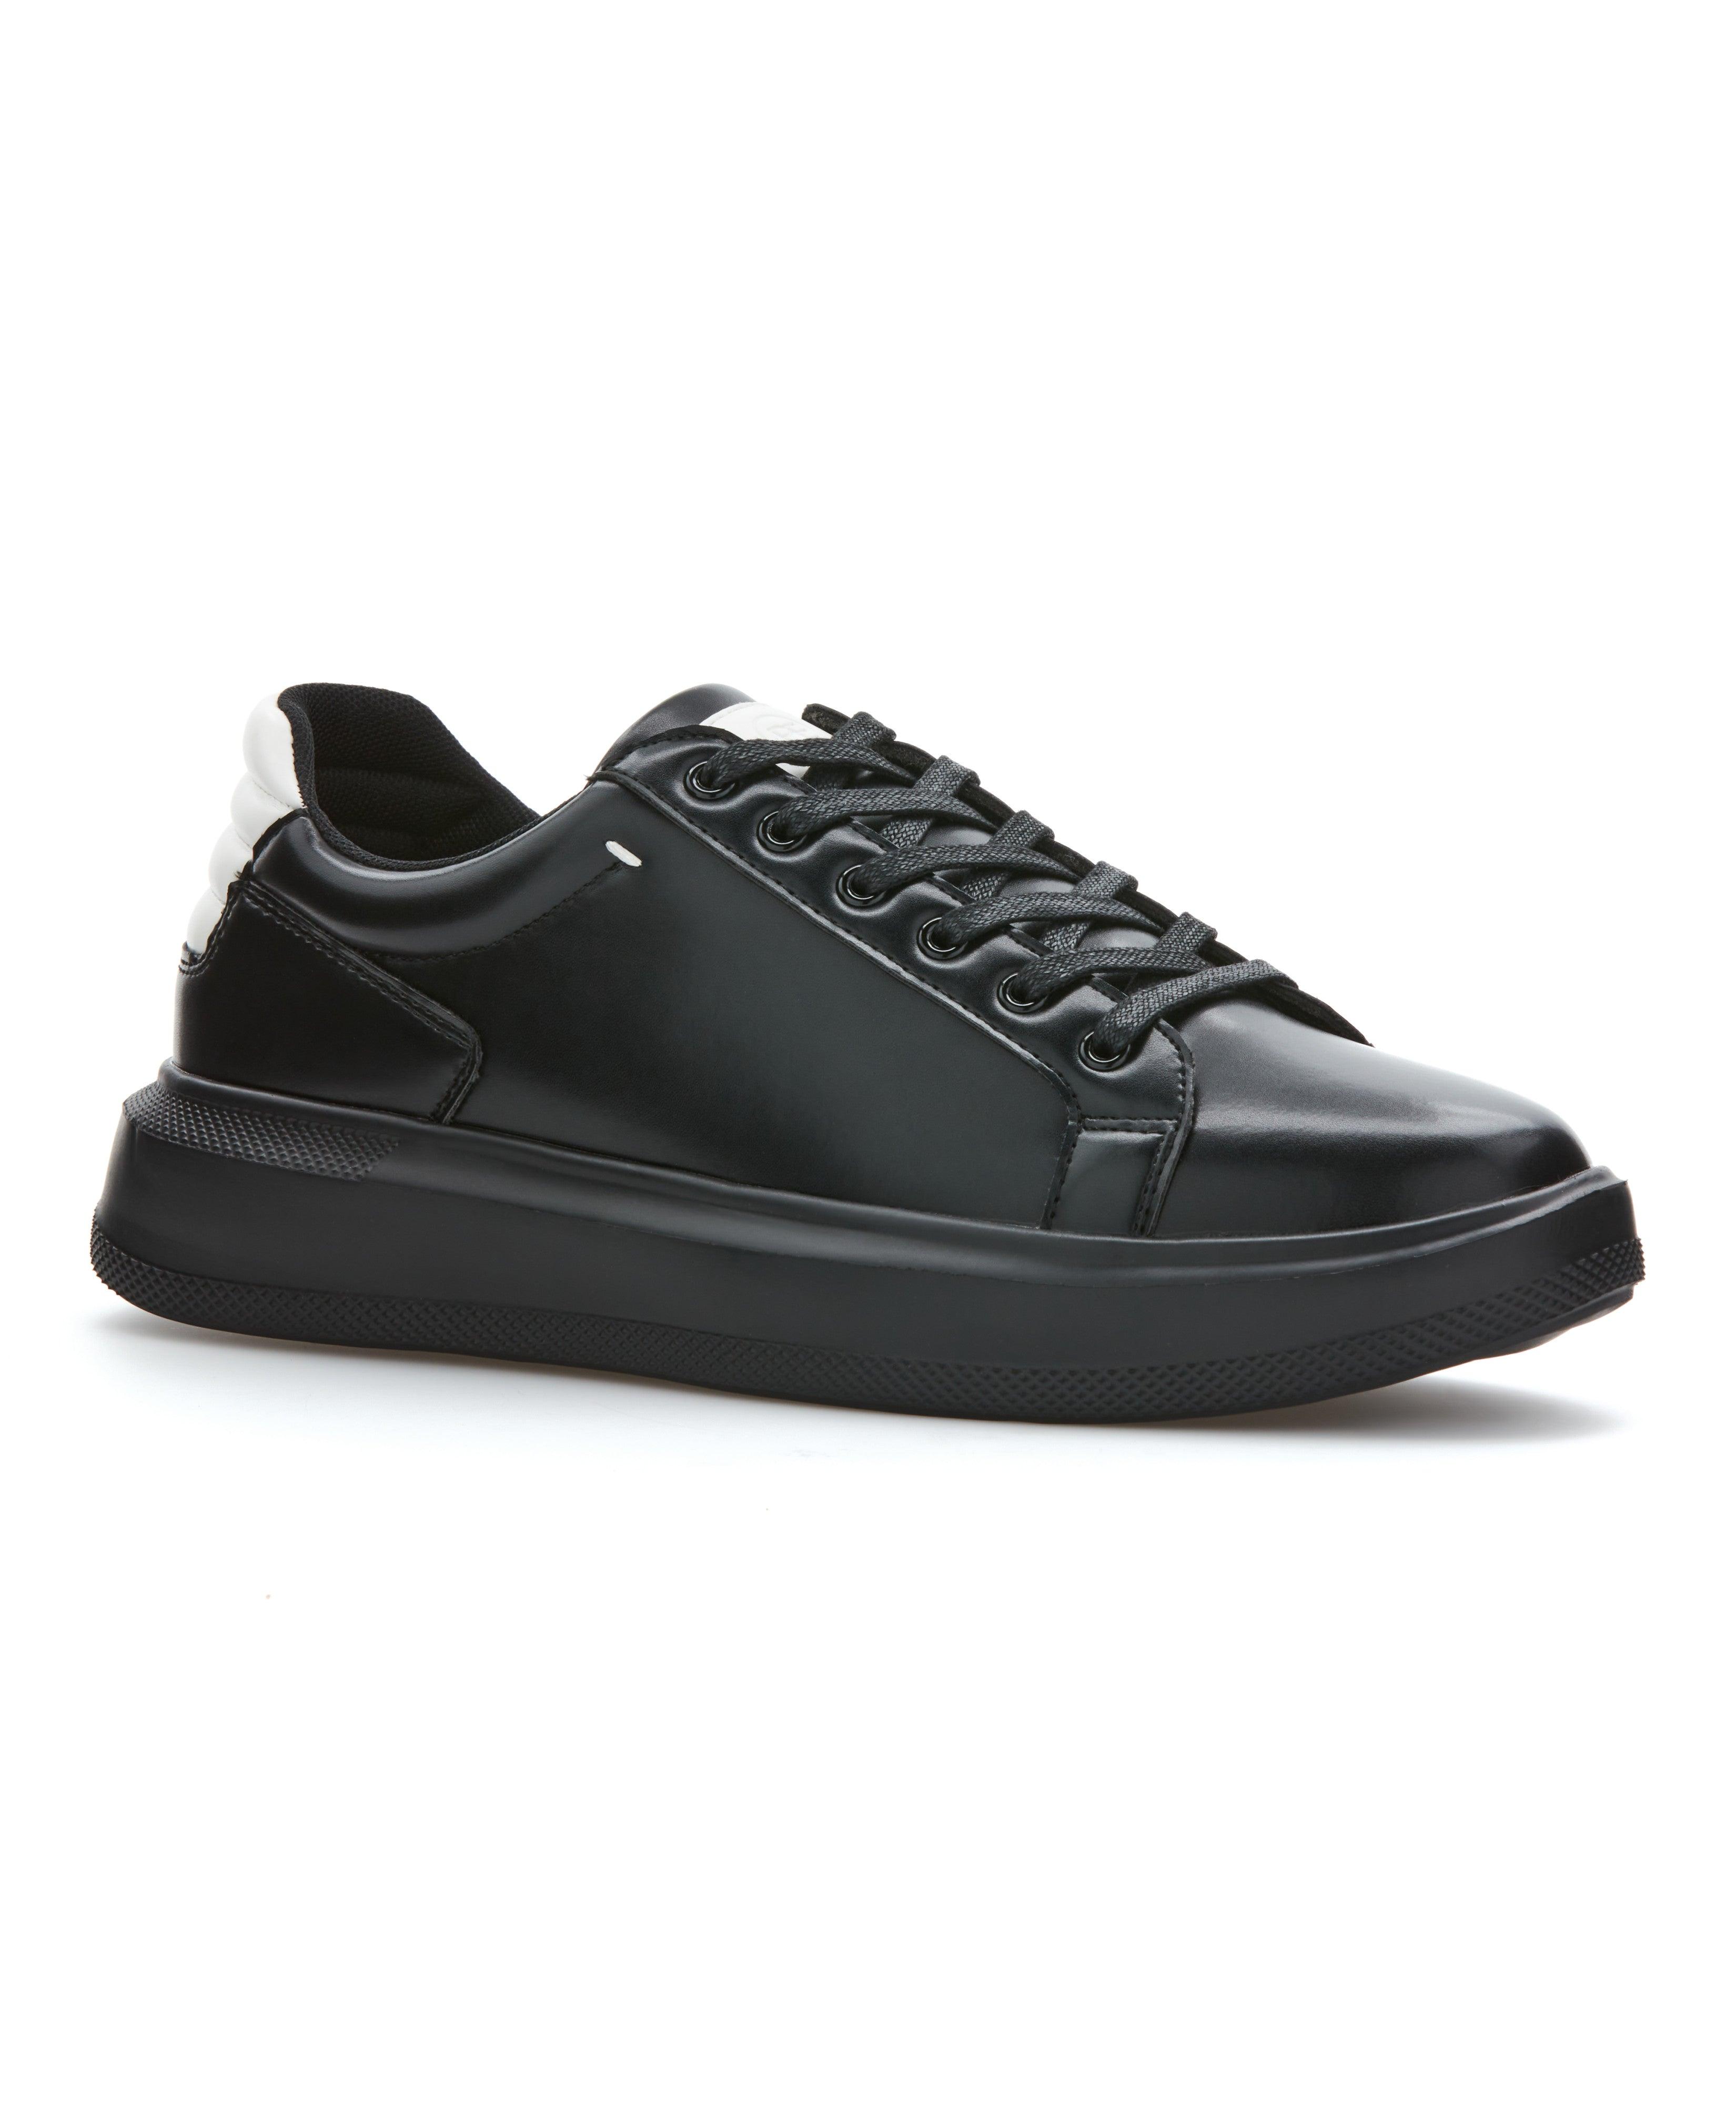 ASOS DESIGN Wide Fit sneaker shoes in black faux leather with chunky sole |  ASOS